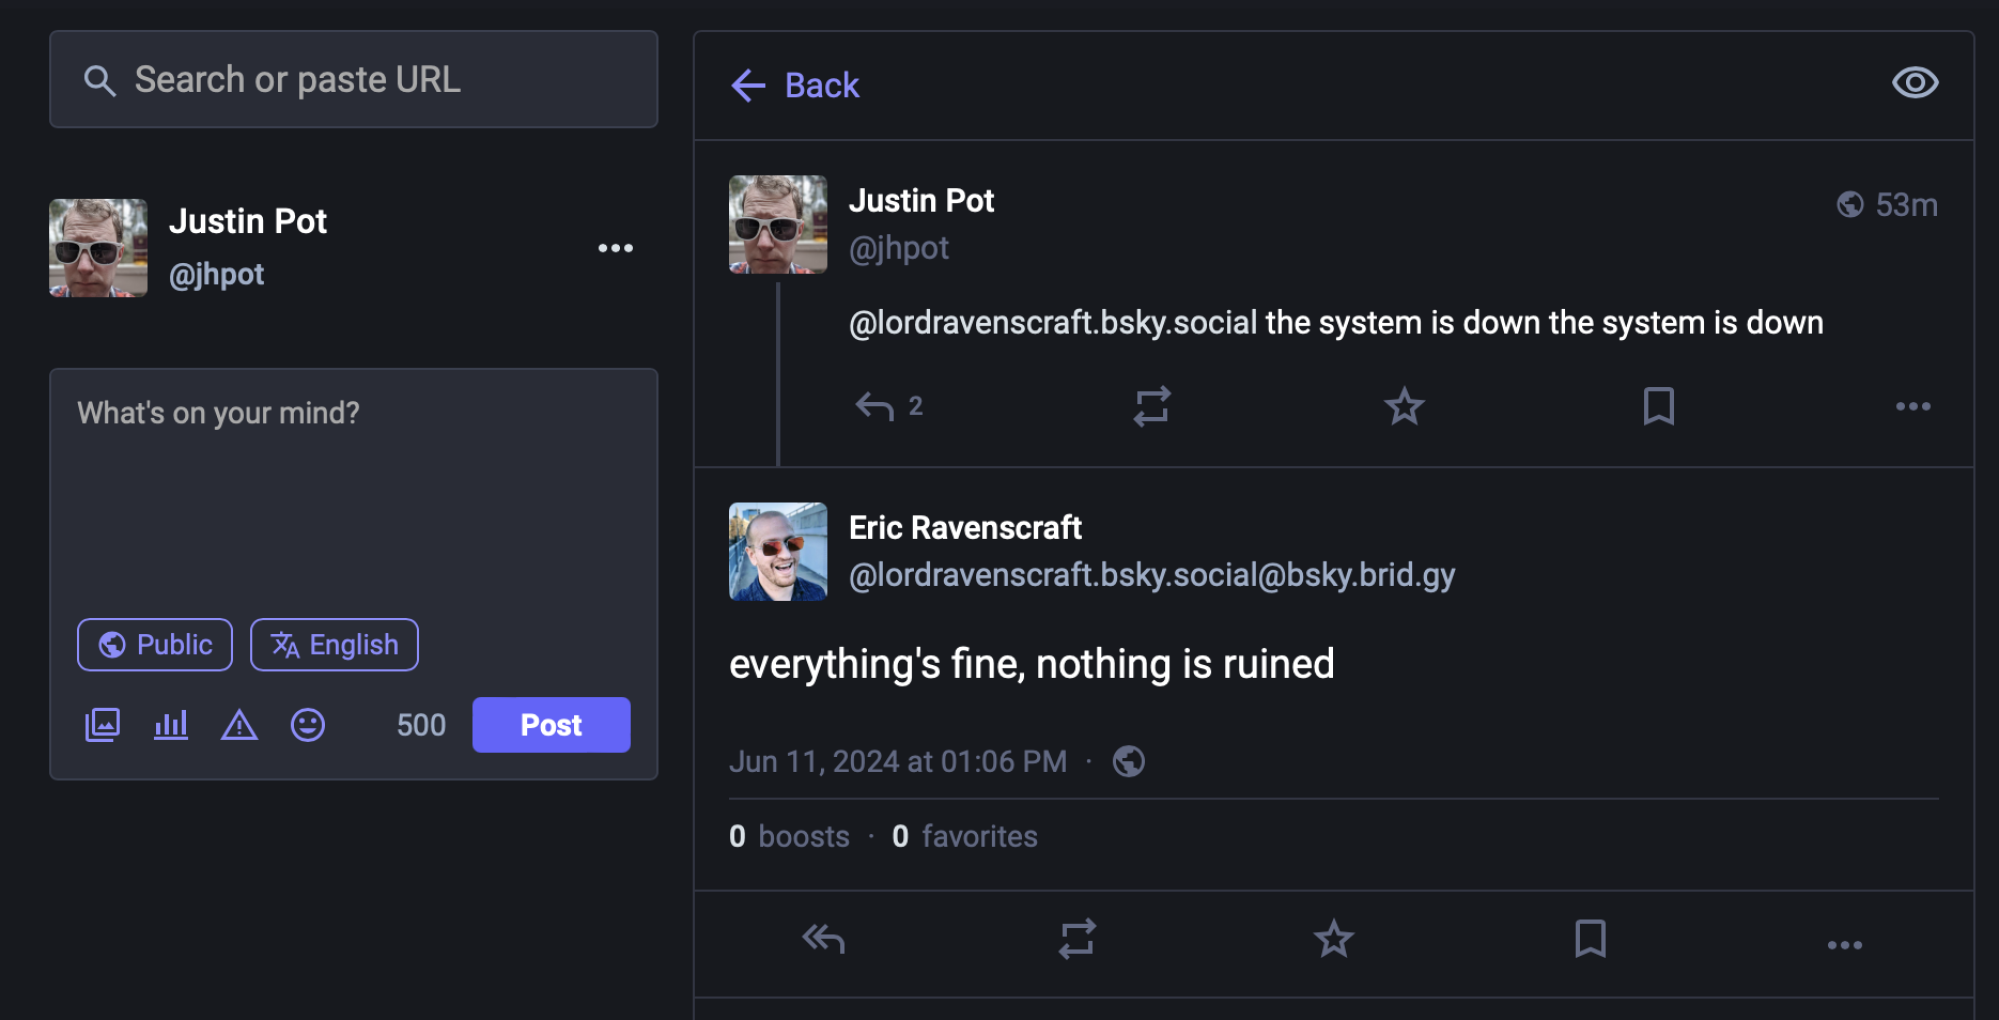 Screenshot of a conversation on Mastodon. I say "@lordravenscraft.bsky.social the system is down the system is down" and Eric, from Bluesky, responds "everything's fine, nothing is ruined"